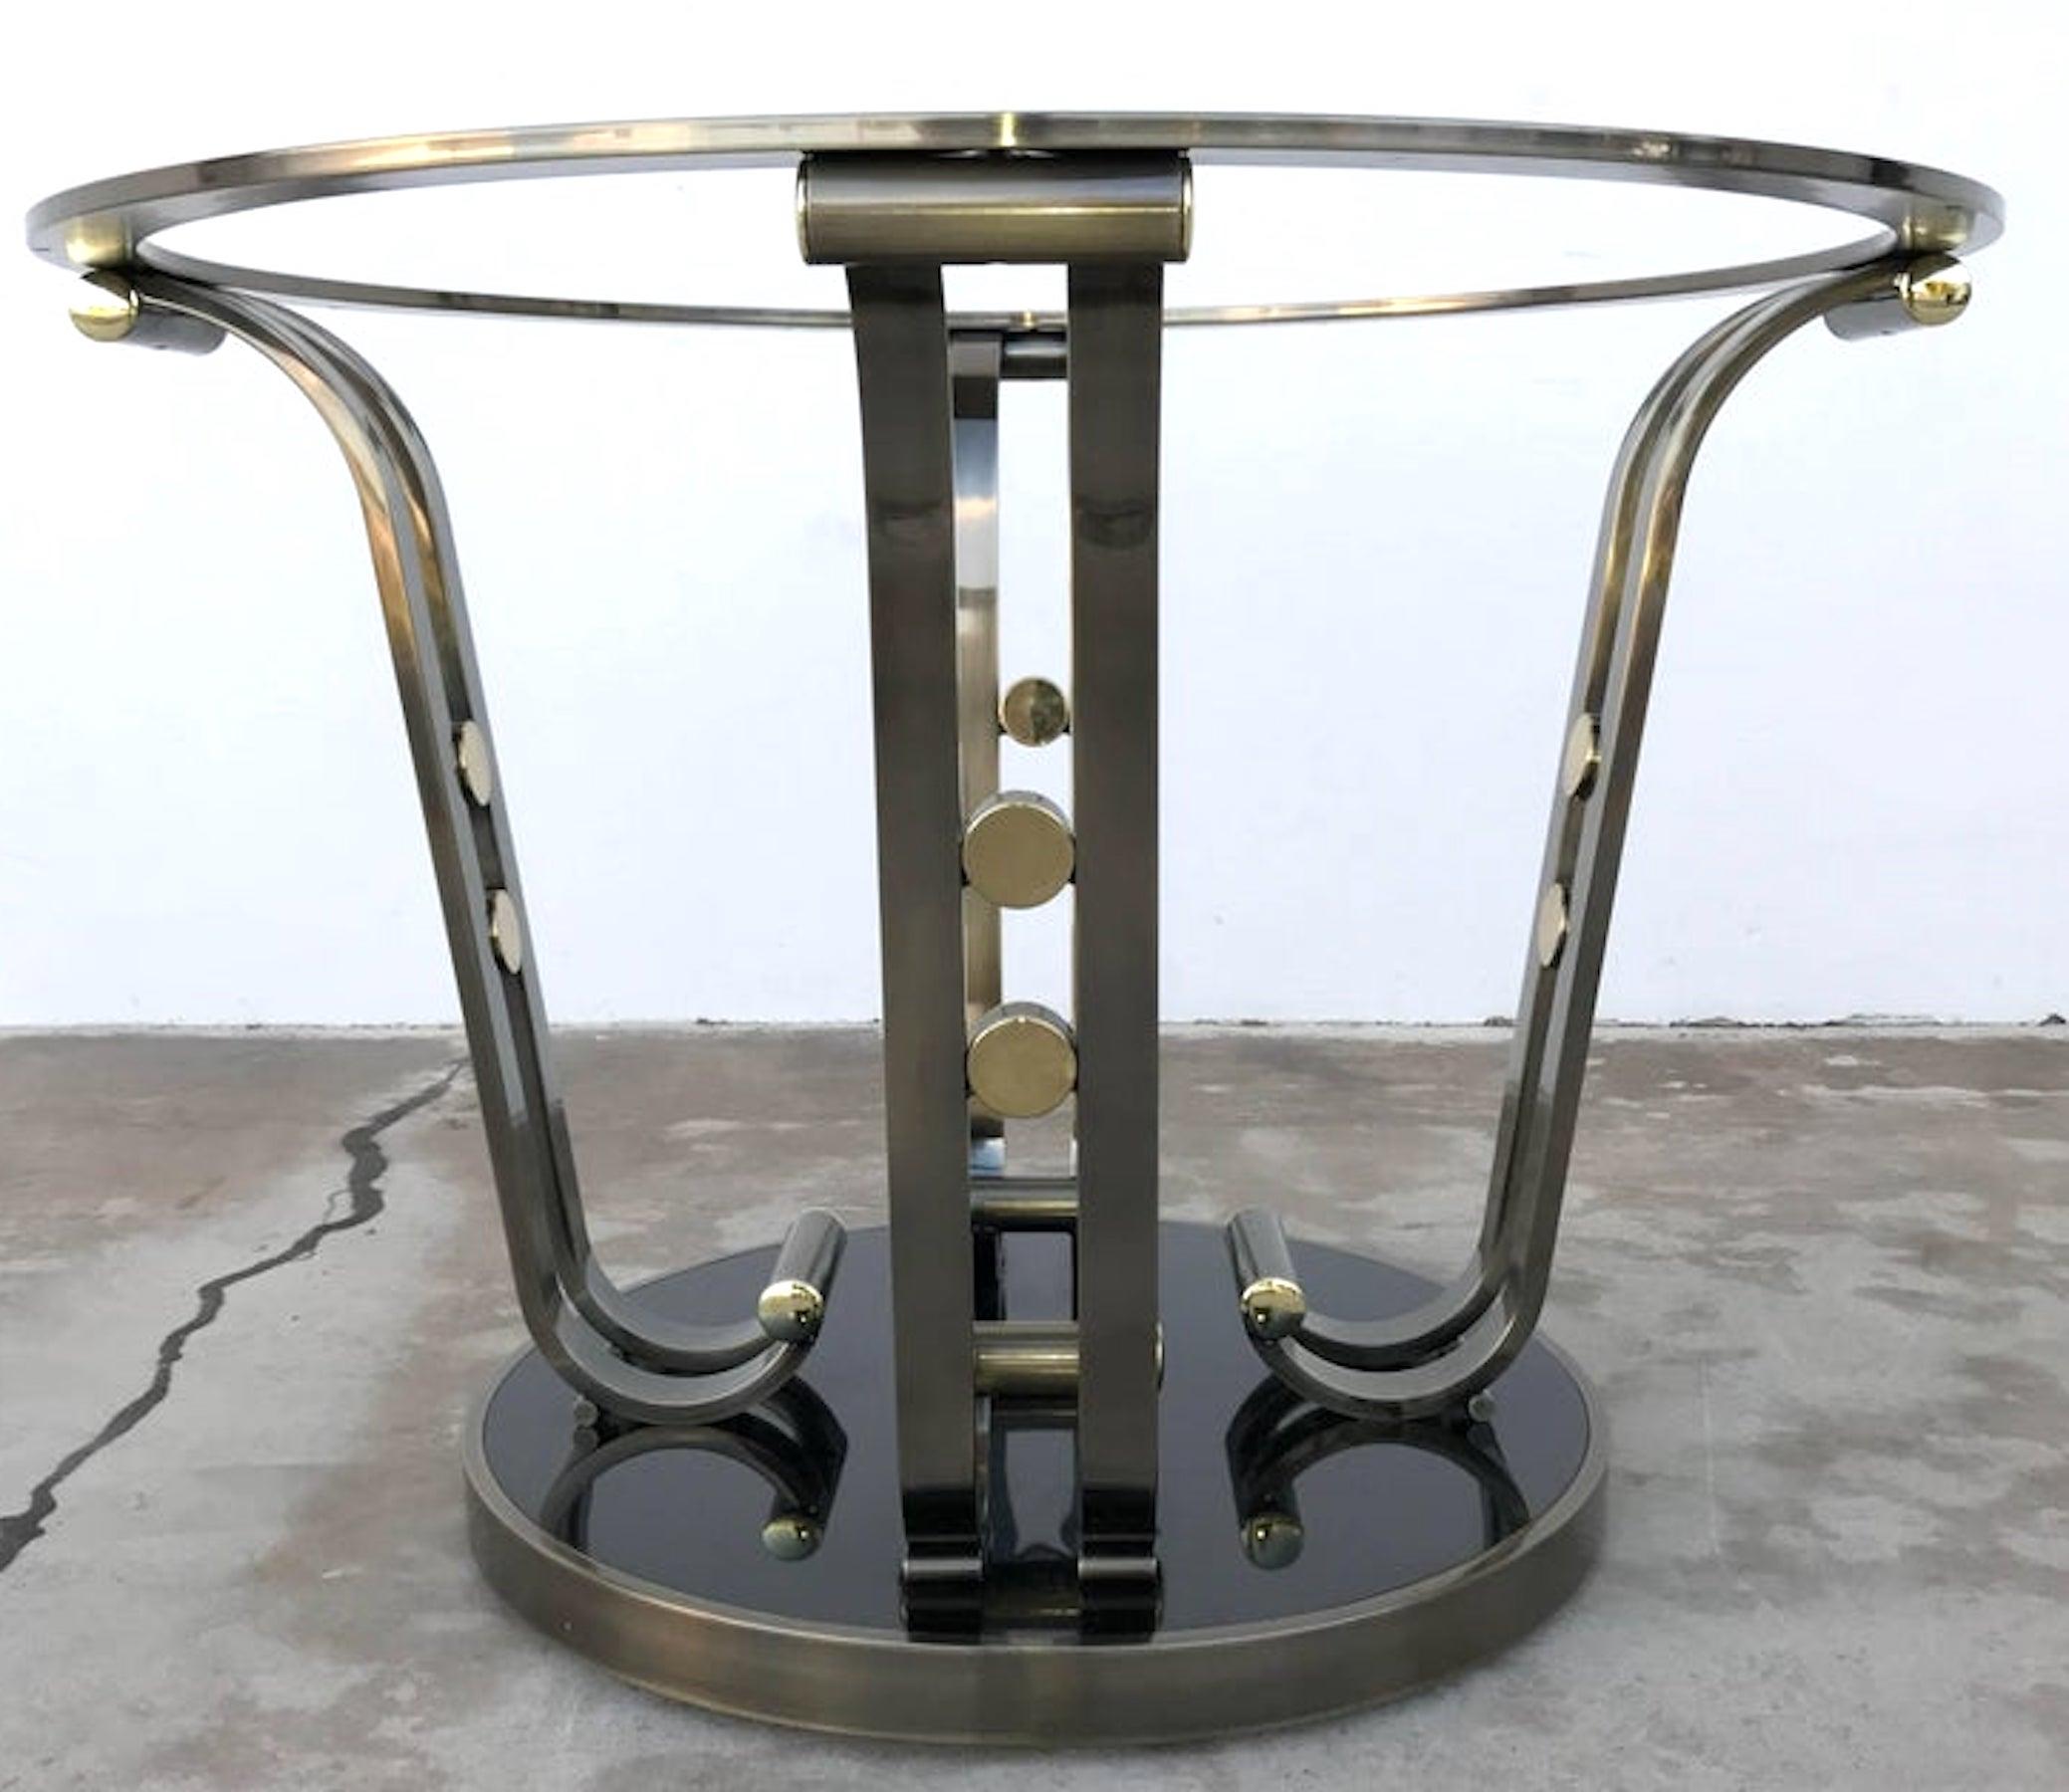 Art Deco style center table base, with four column gun metal, brass and enameled pedestal base. Can accommodate a 60